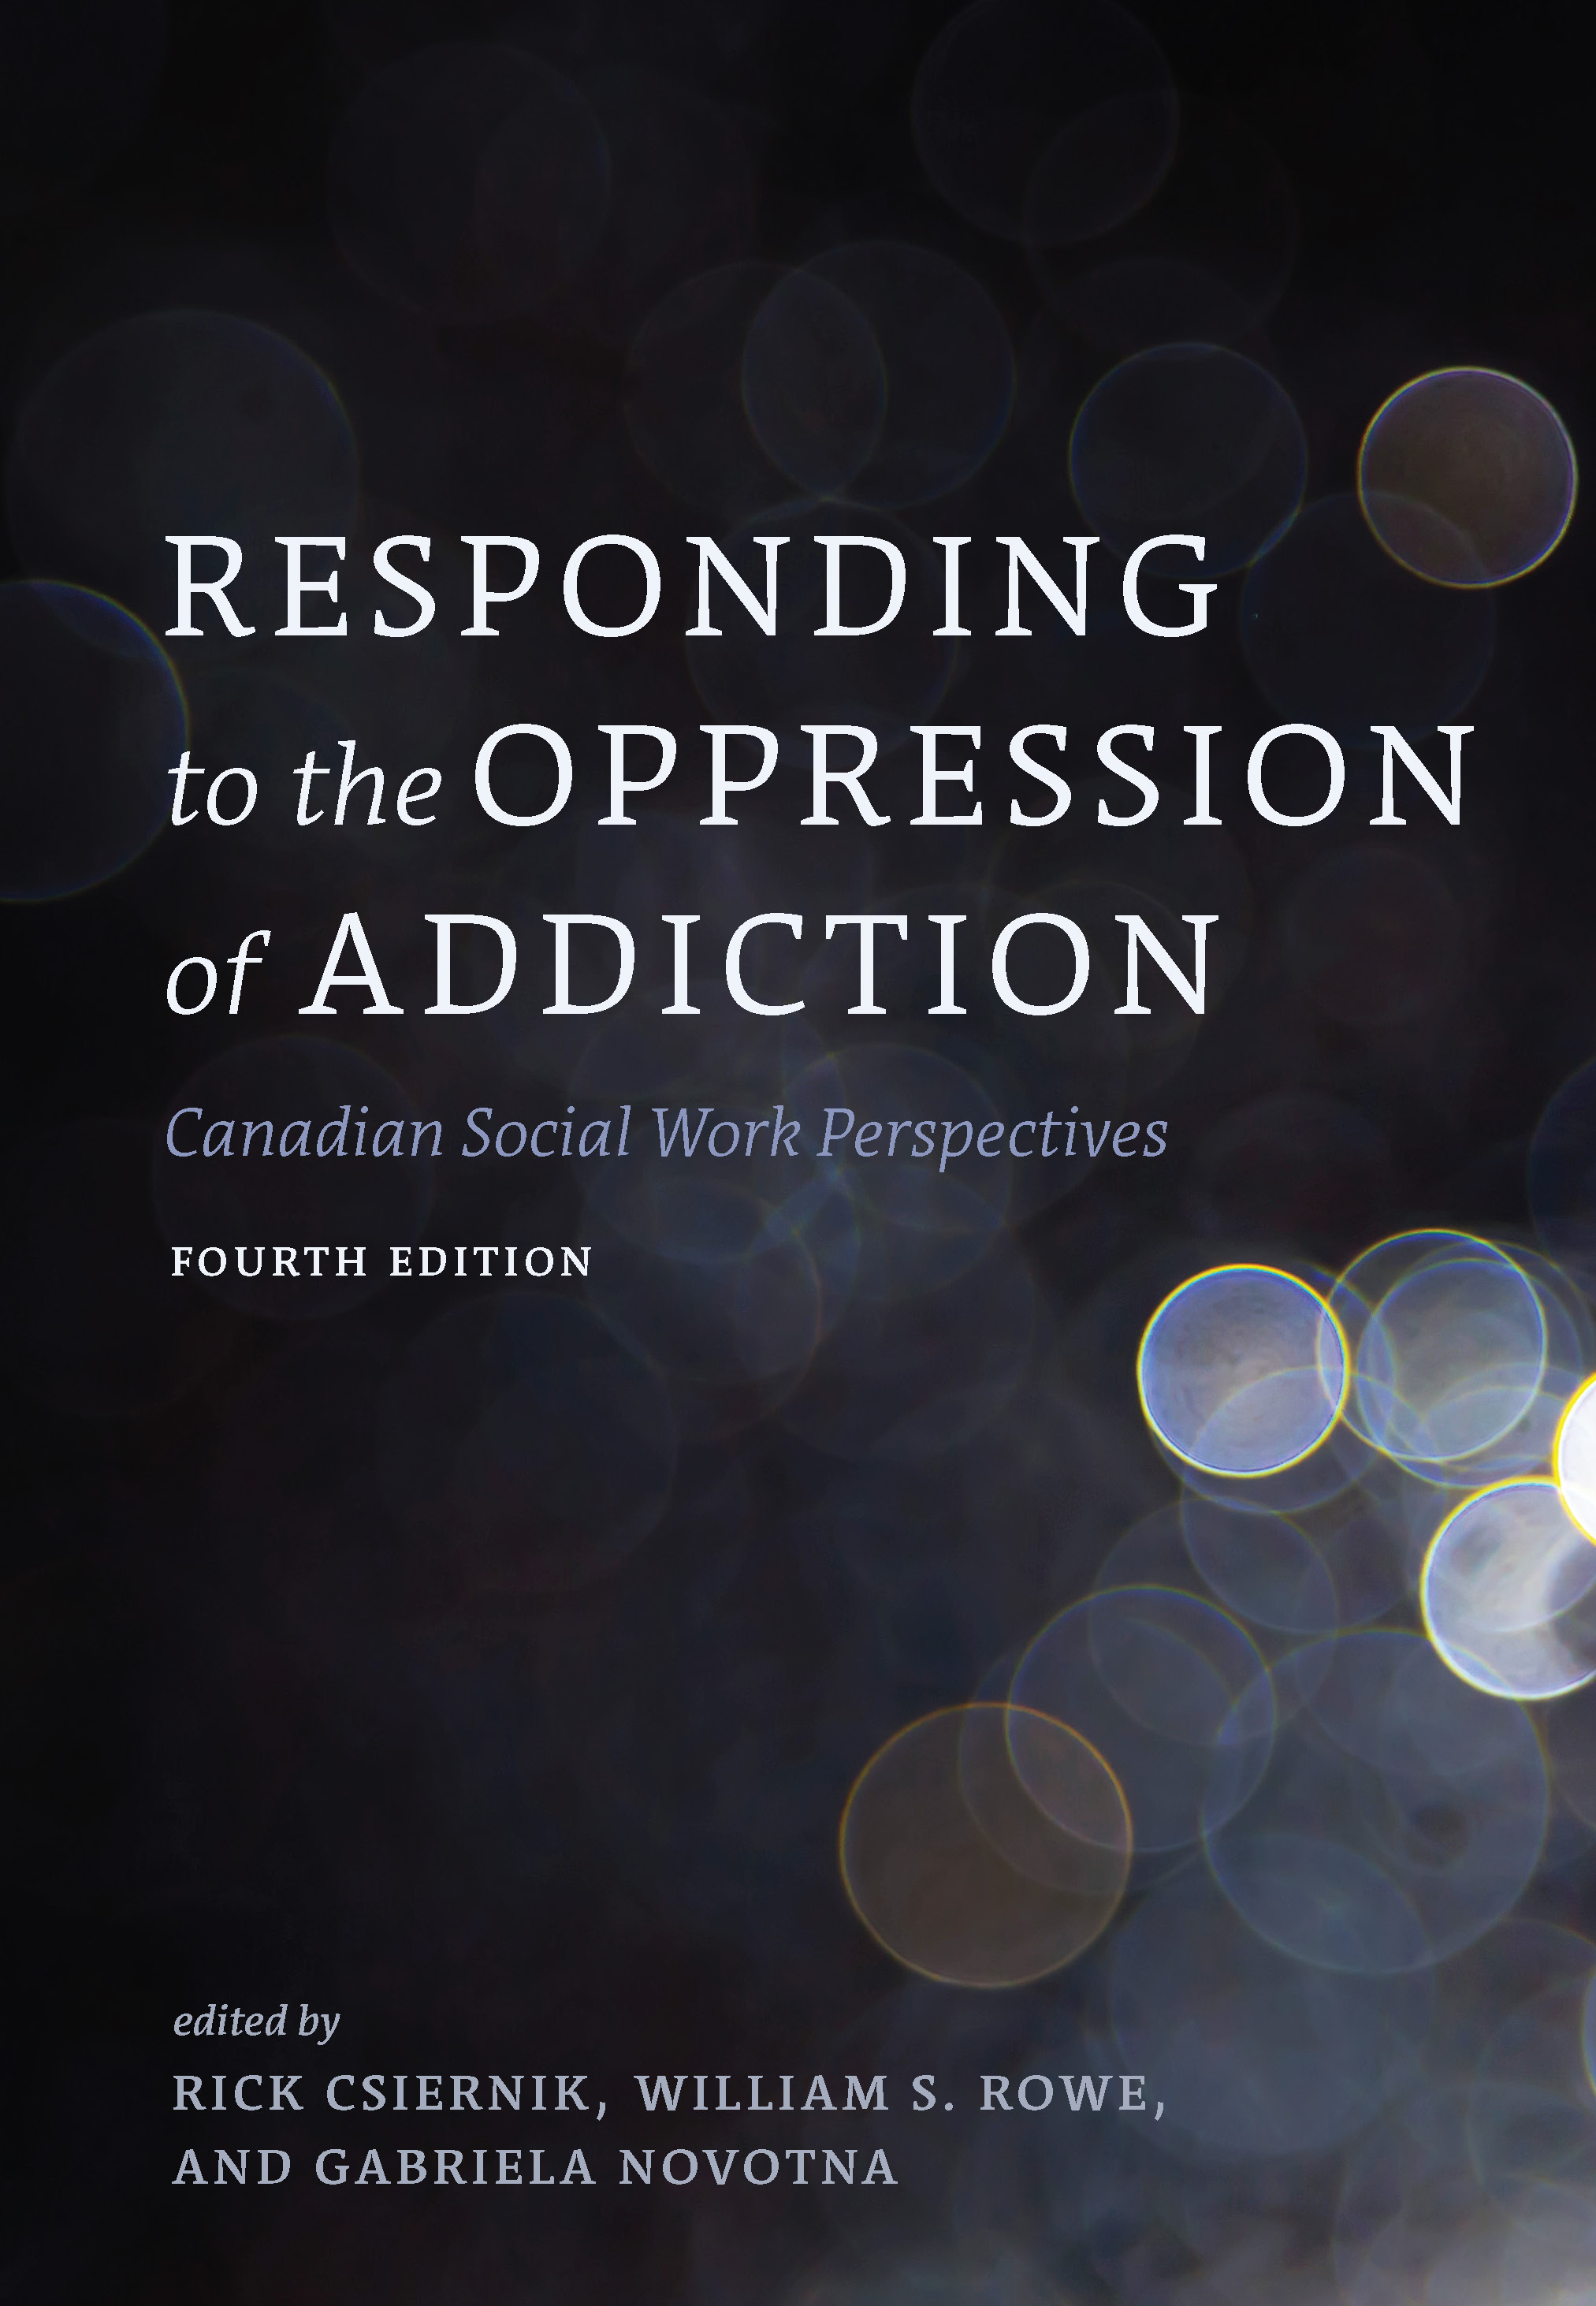 Responding　Canadian　Oppression　the　Edition　to　Fourth　Addiction,　of　Scholars